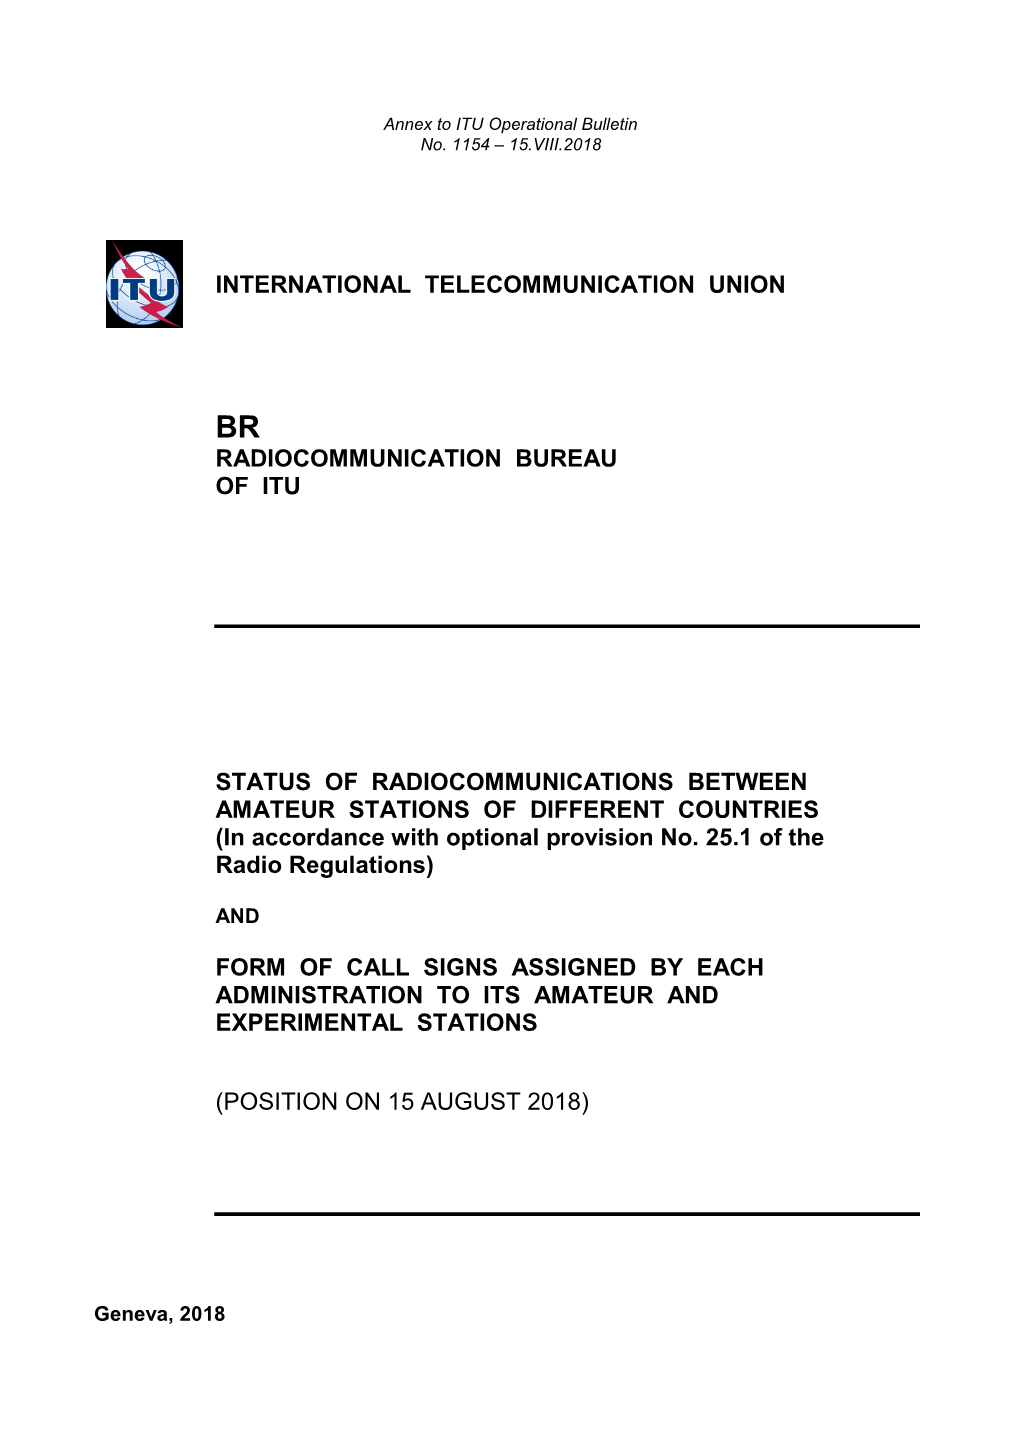 STATUS of RADIOCOMMUNICATIONS BETWEEN AMATEUR STATIONS of DIFFERENT COUNTRIES (In Accordance with Optional Provision No